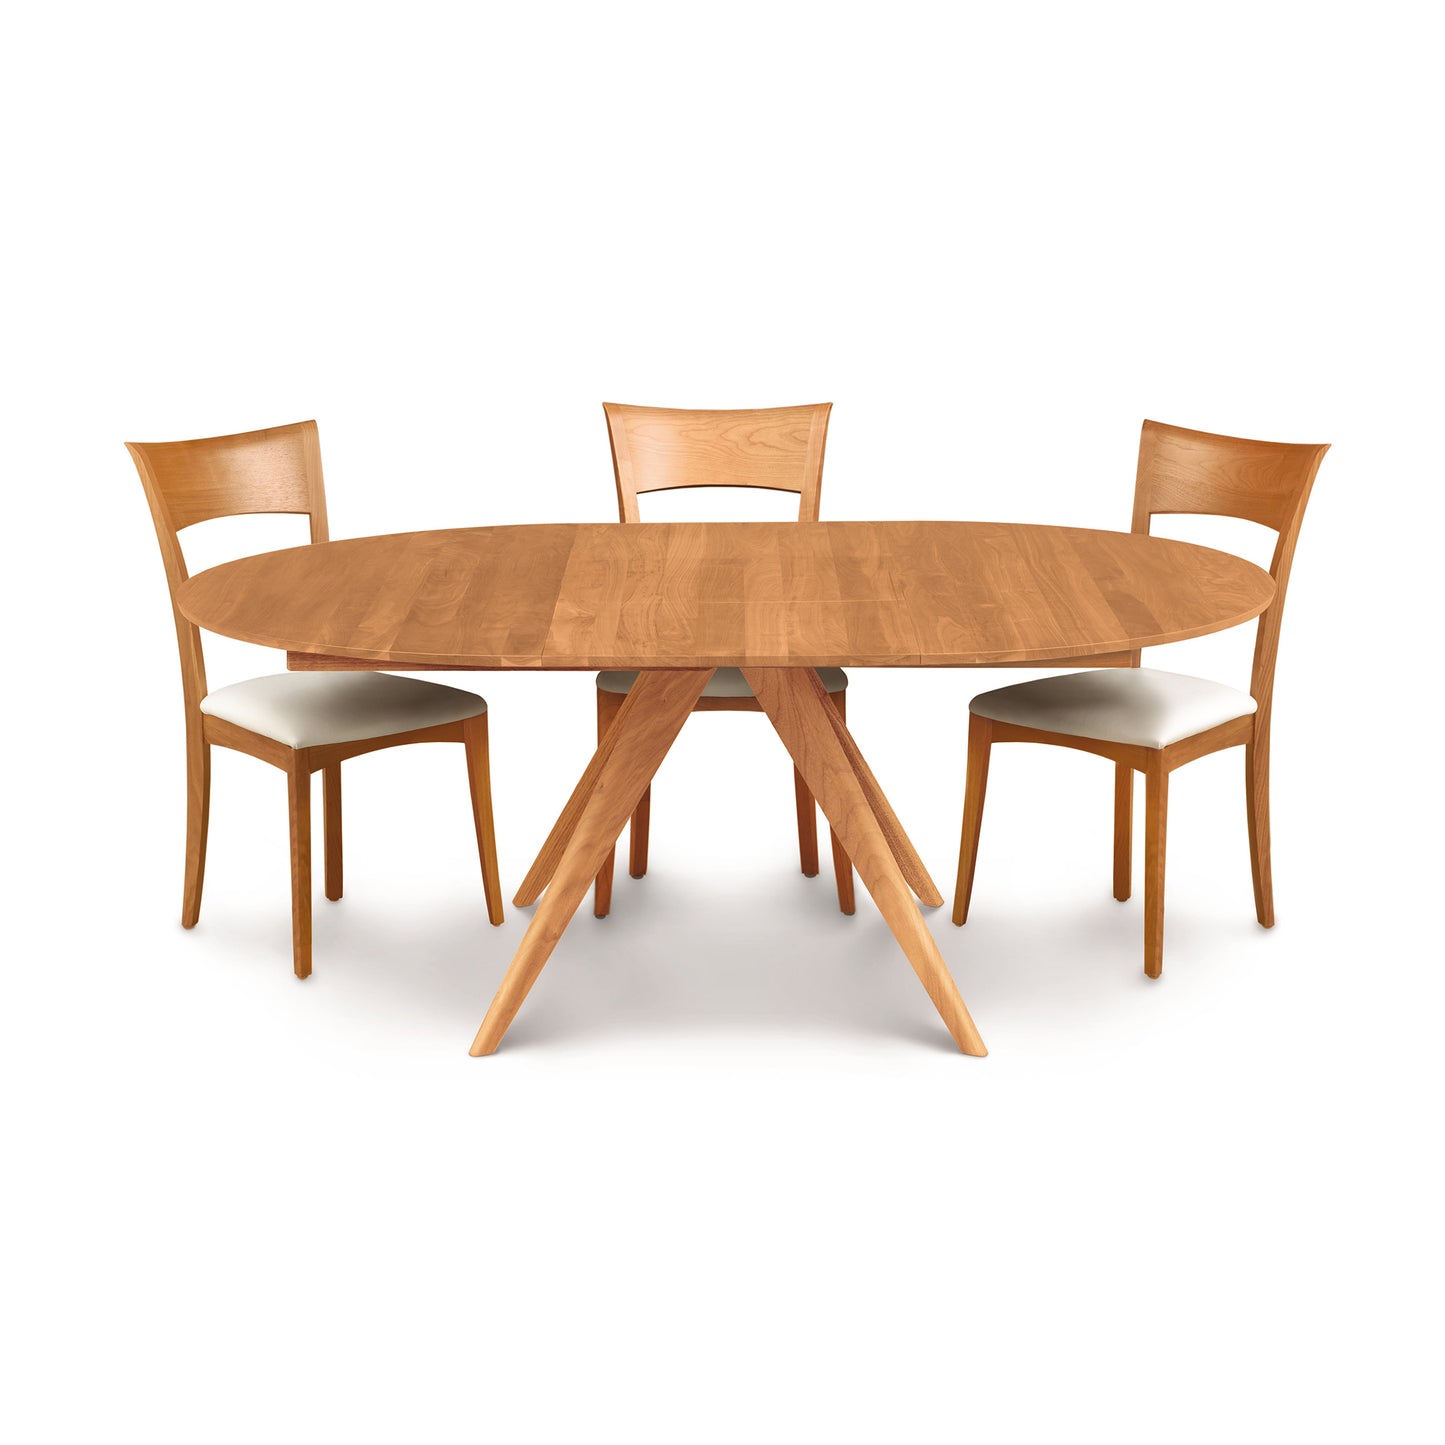 A solid North American wood Copeland Furniture Catalina Round Extension Table with four matching chairs on a white background.